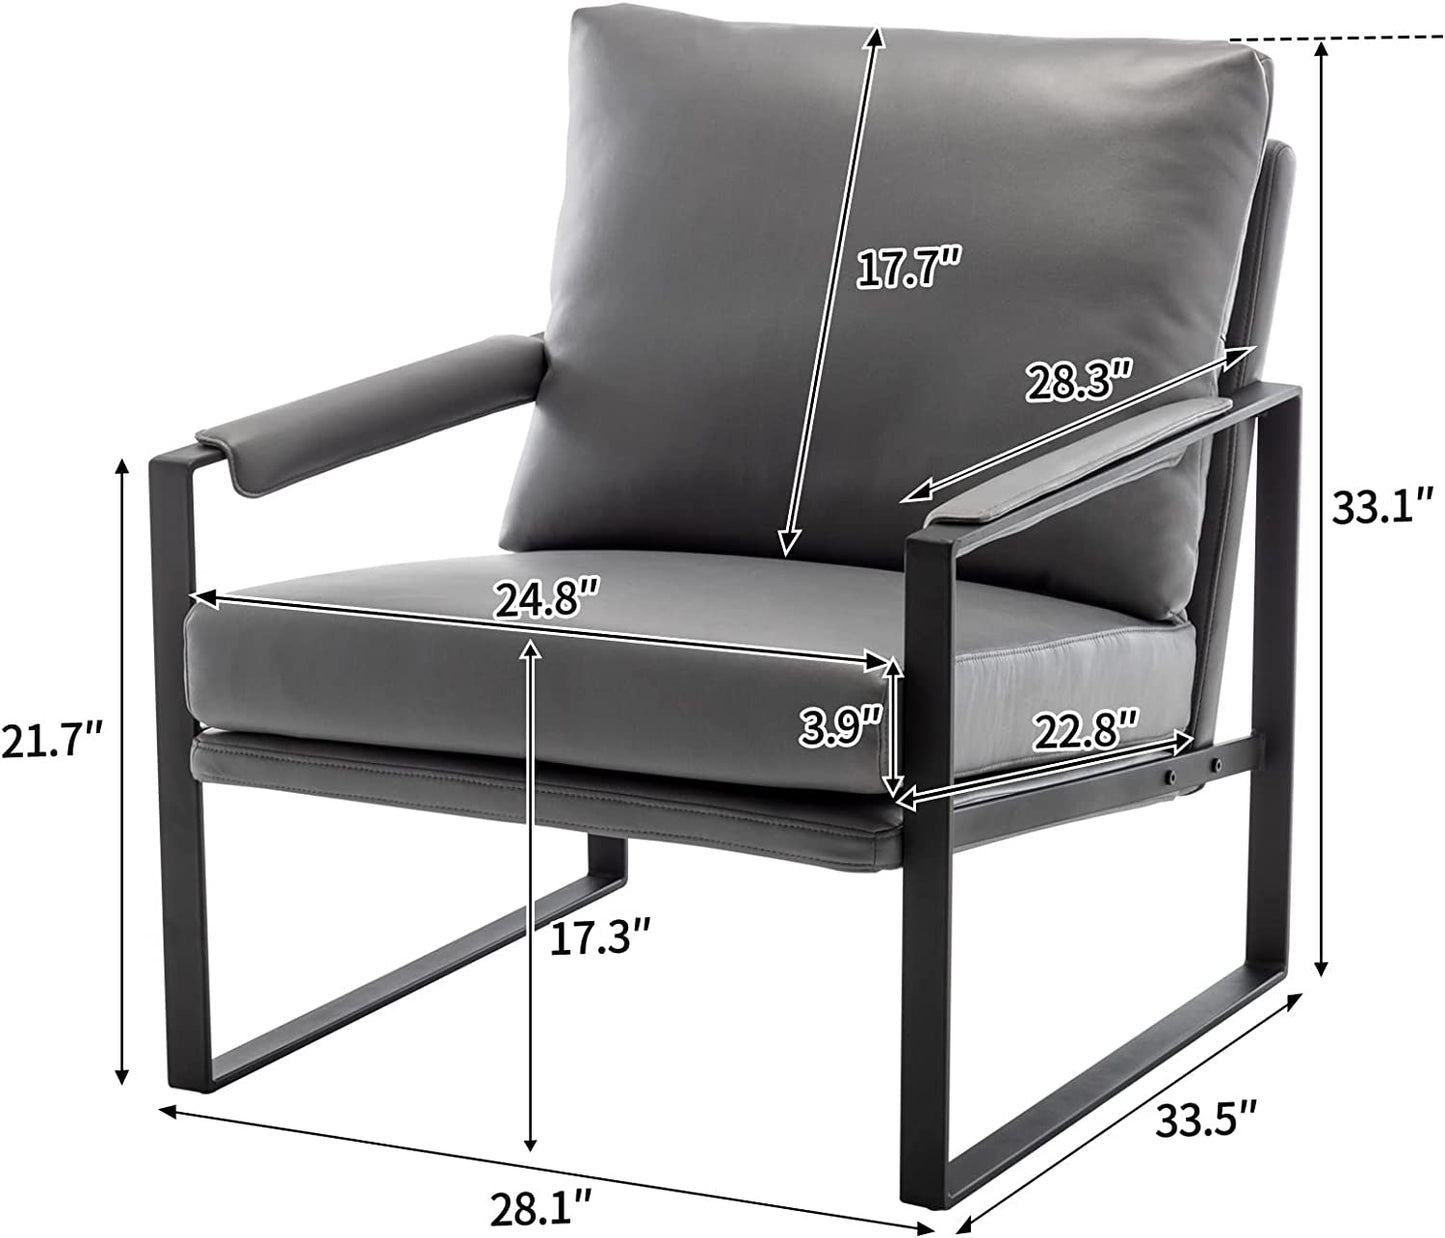 UNICOO - Modern Faux Leather Accent Chairs, Armchairs Living Room Chairs Leisure Chair Reception Chair with Metal Frame (ZKL-239K)